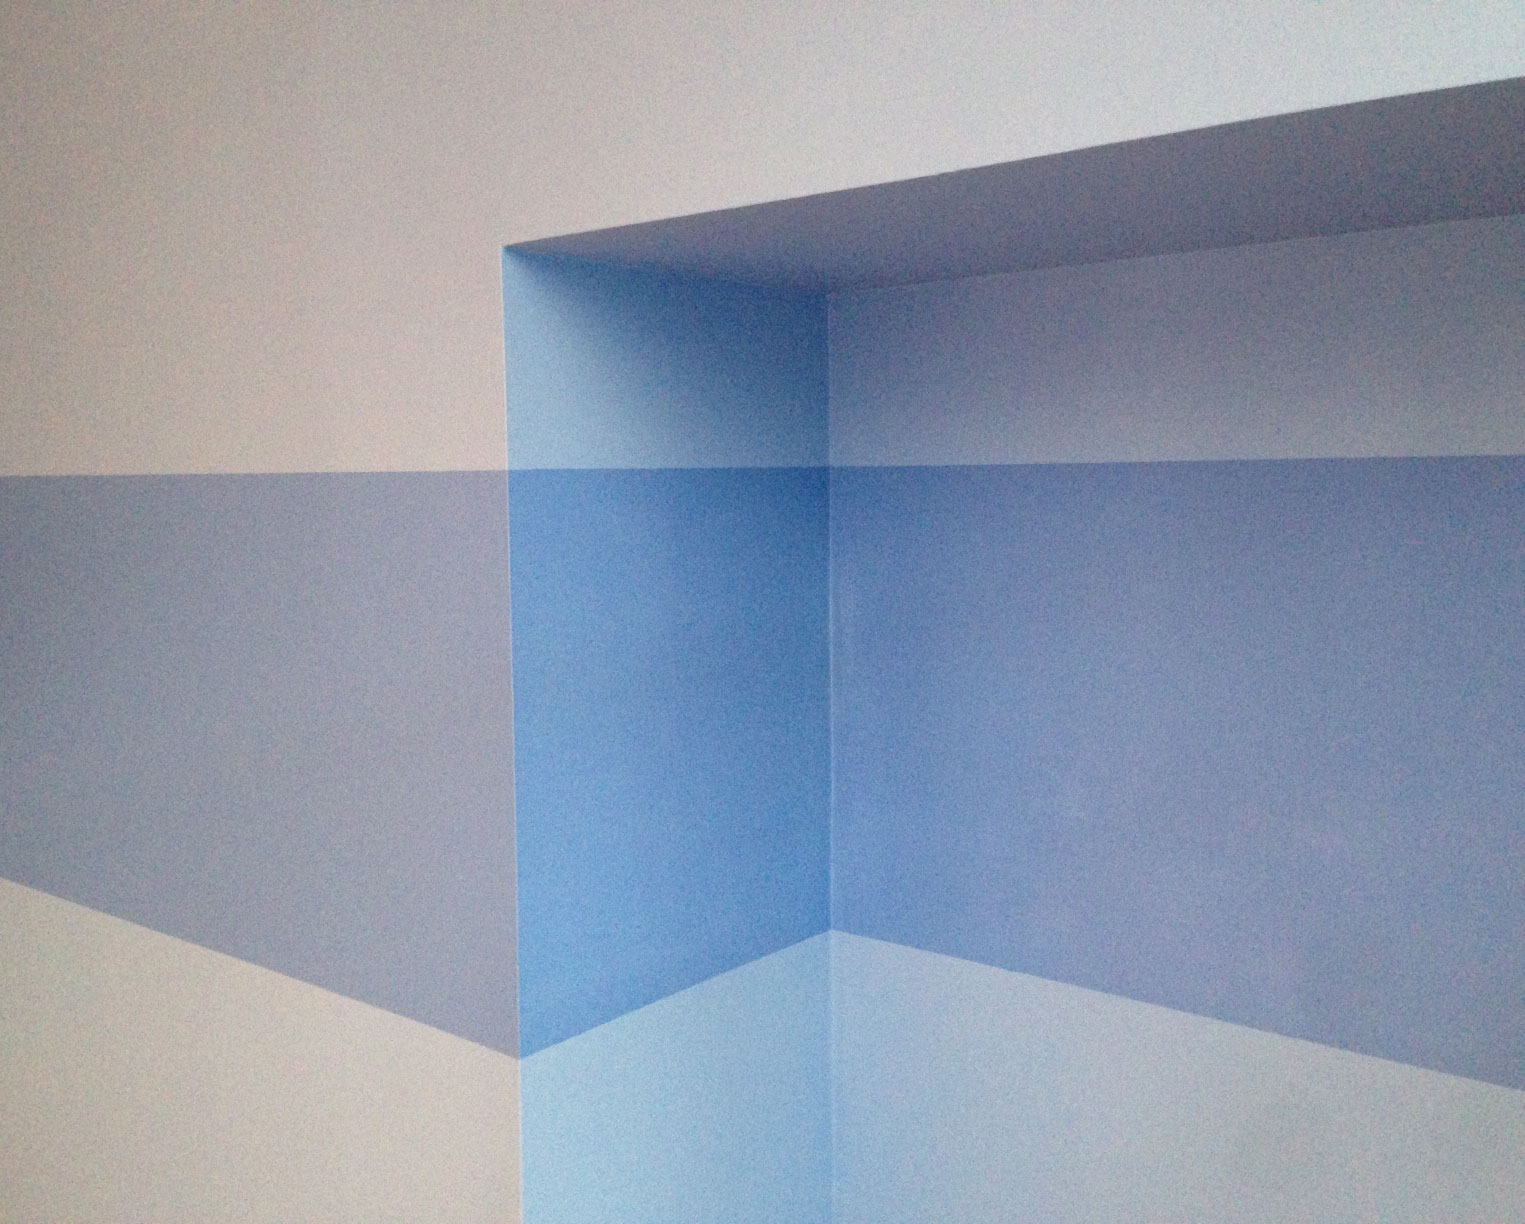 Bright blue stripe painted along a dull blue wall